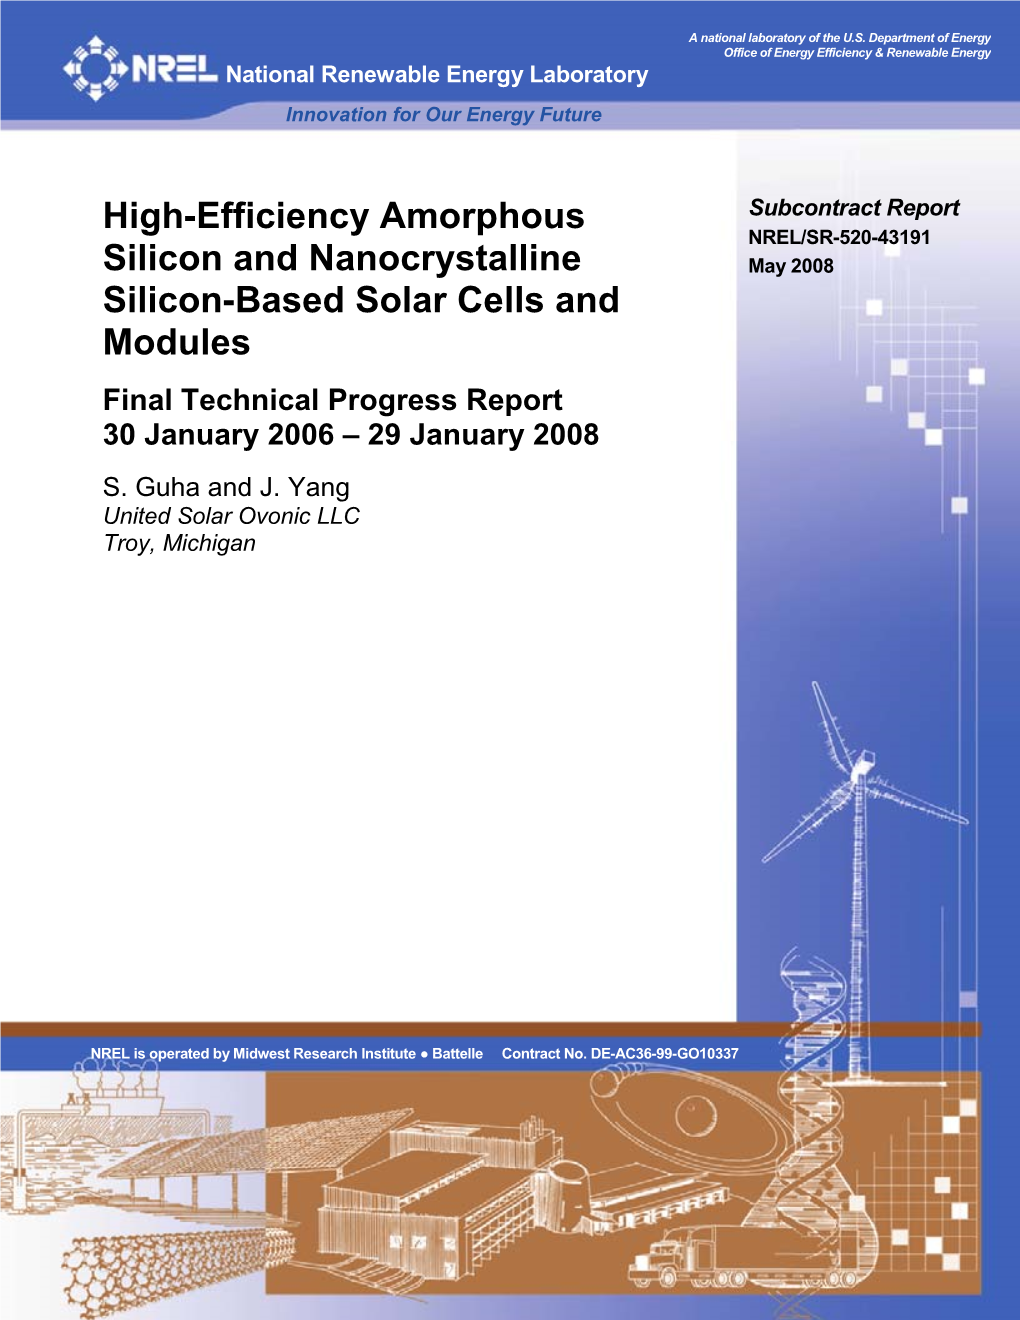 High-Efficiency Amorphous Silicon and Nanocrystalline Silicon- DE-AC36-99-GO10337 Based Solar Cells and Modules: Final Technical Progress Report, 5B